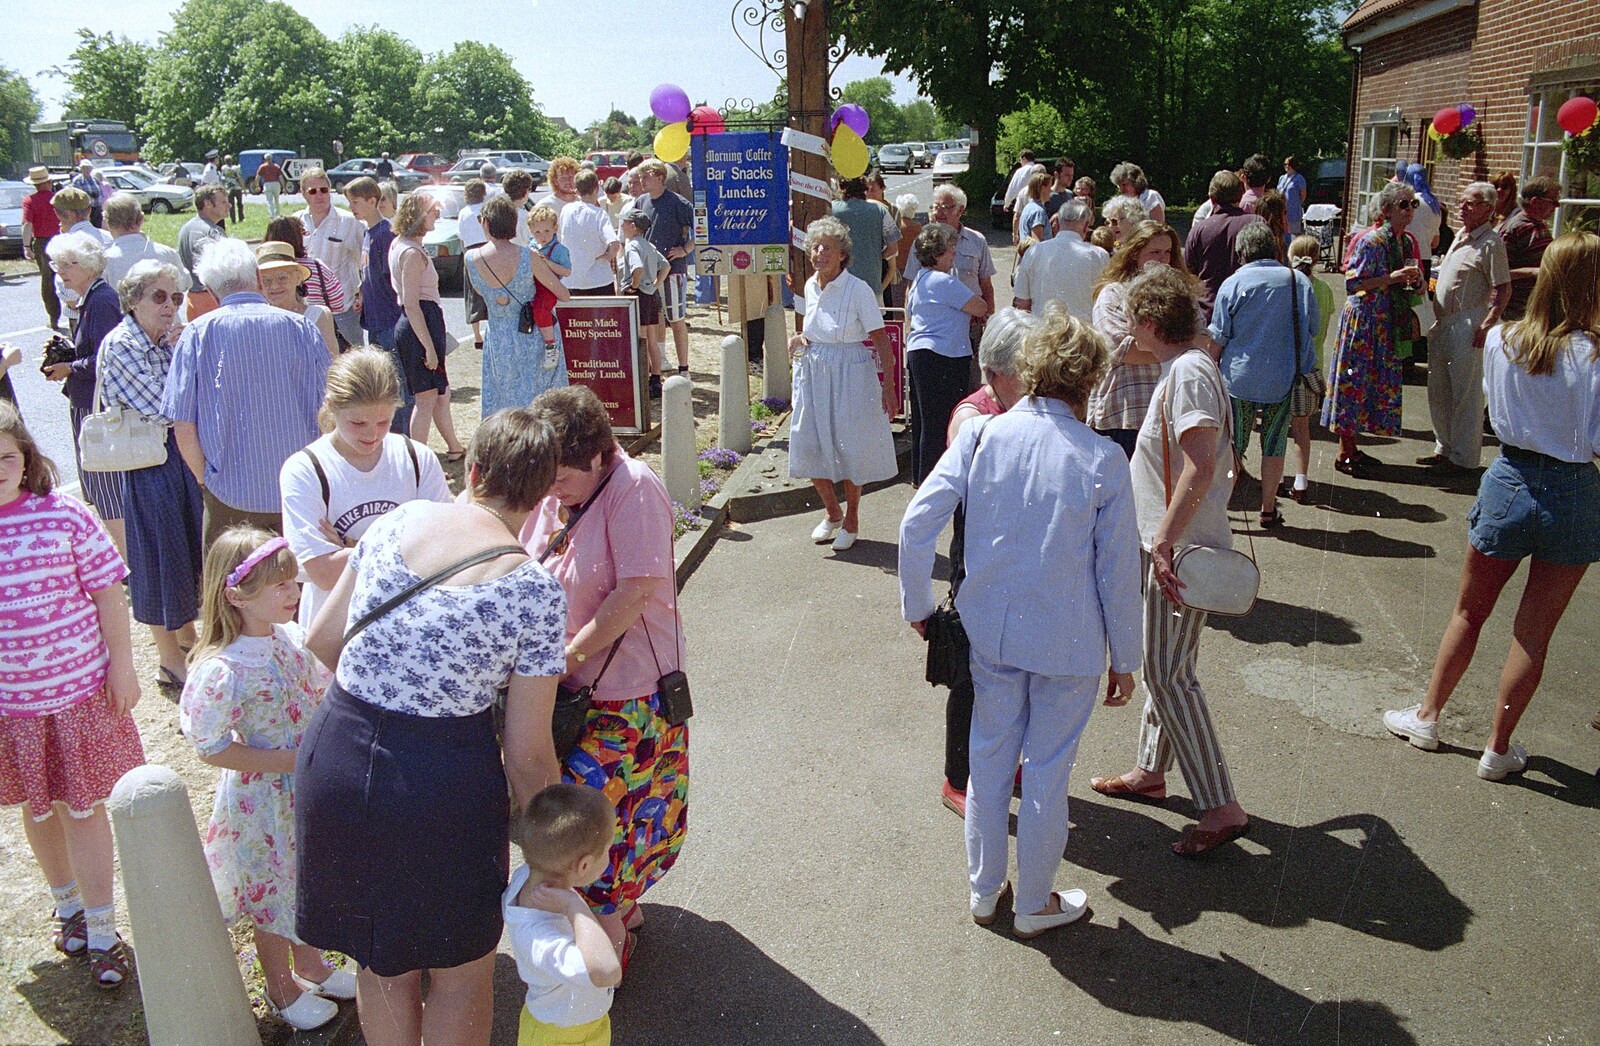 Another crowd scene from The Norwich Union Mail Coach Run, The Swan Inn, Brome - 15th June 1996